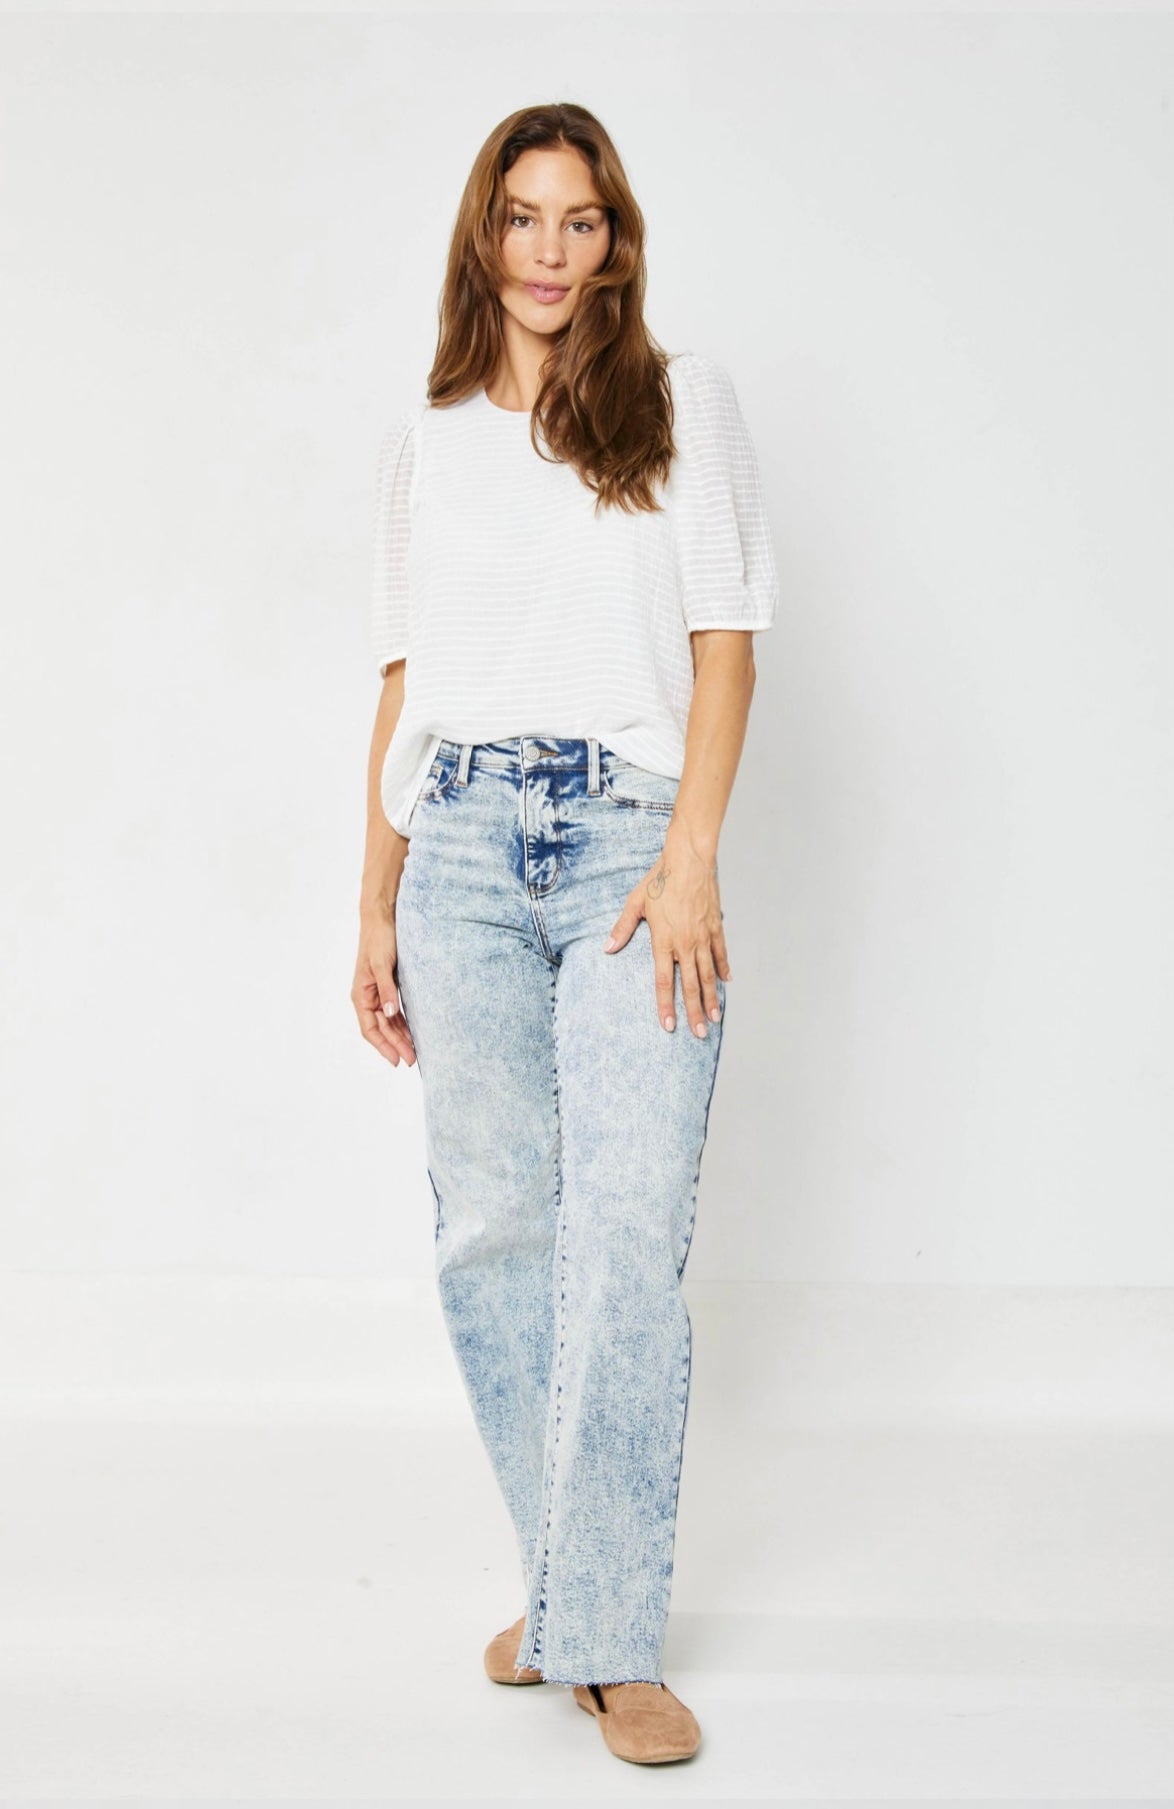 Mineral Wash Jeans